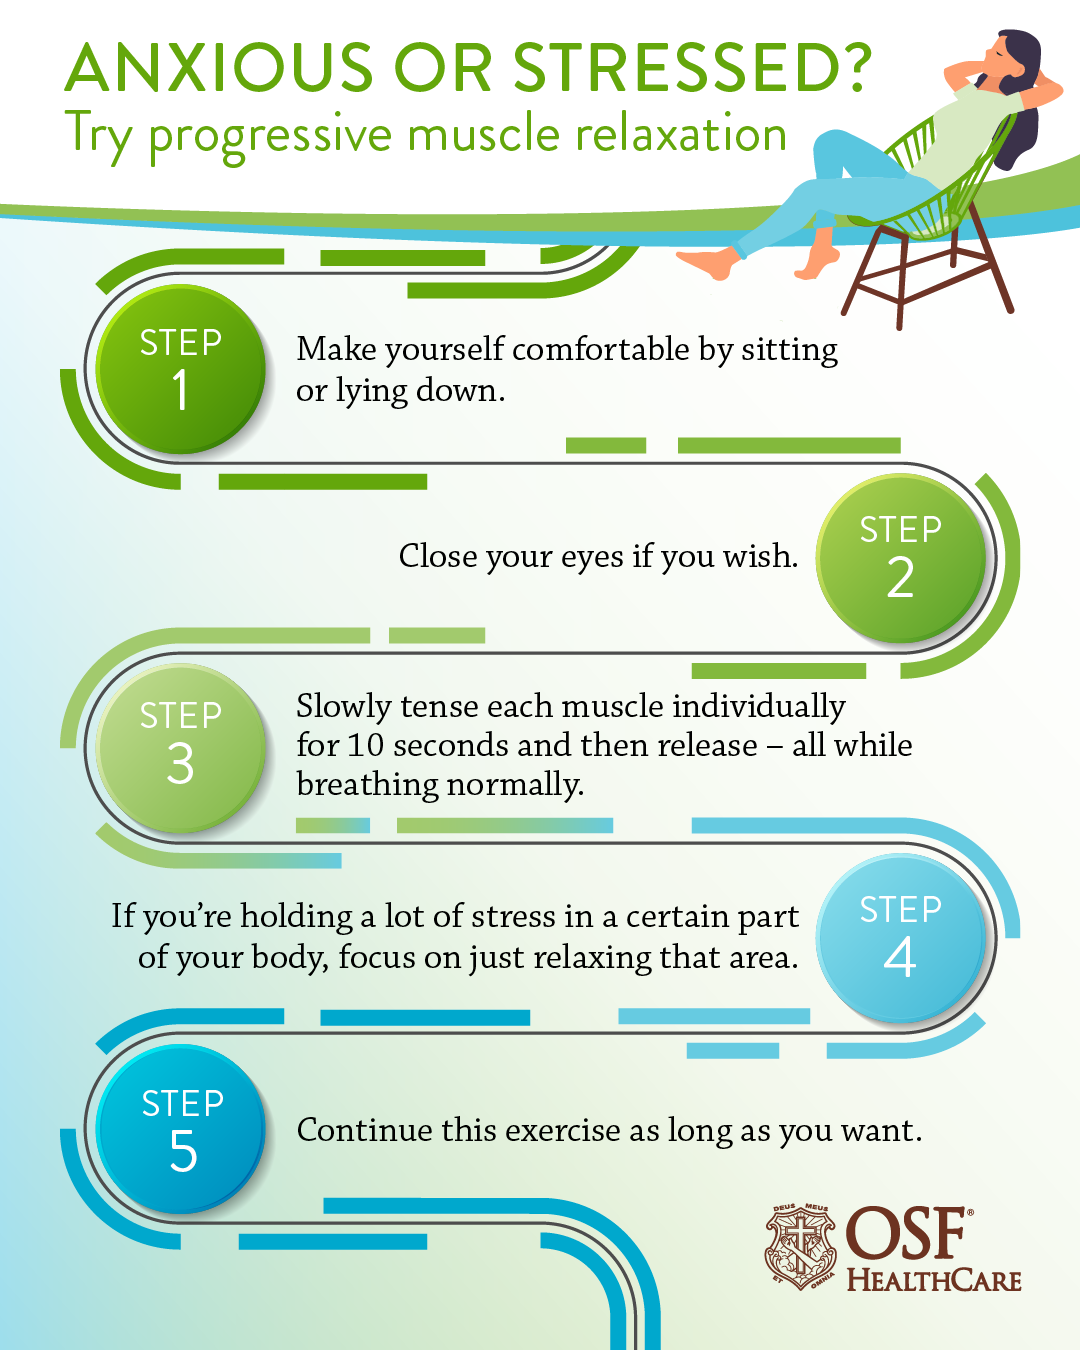 Body Wise Wellness - 6 Tactics To Reduce Muscle Tension